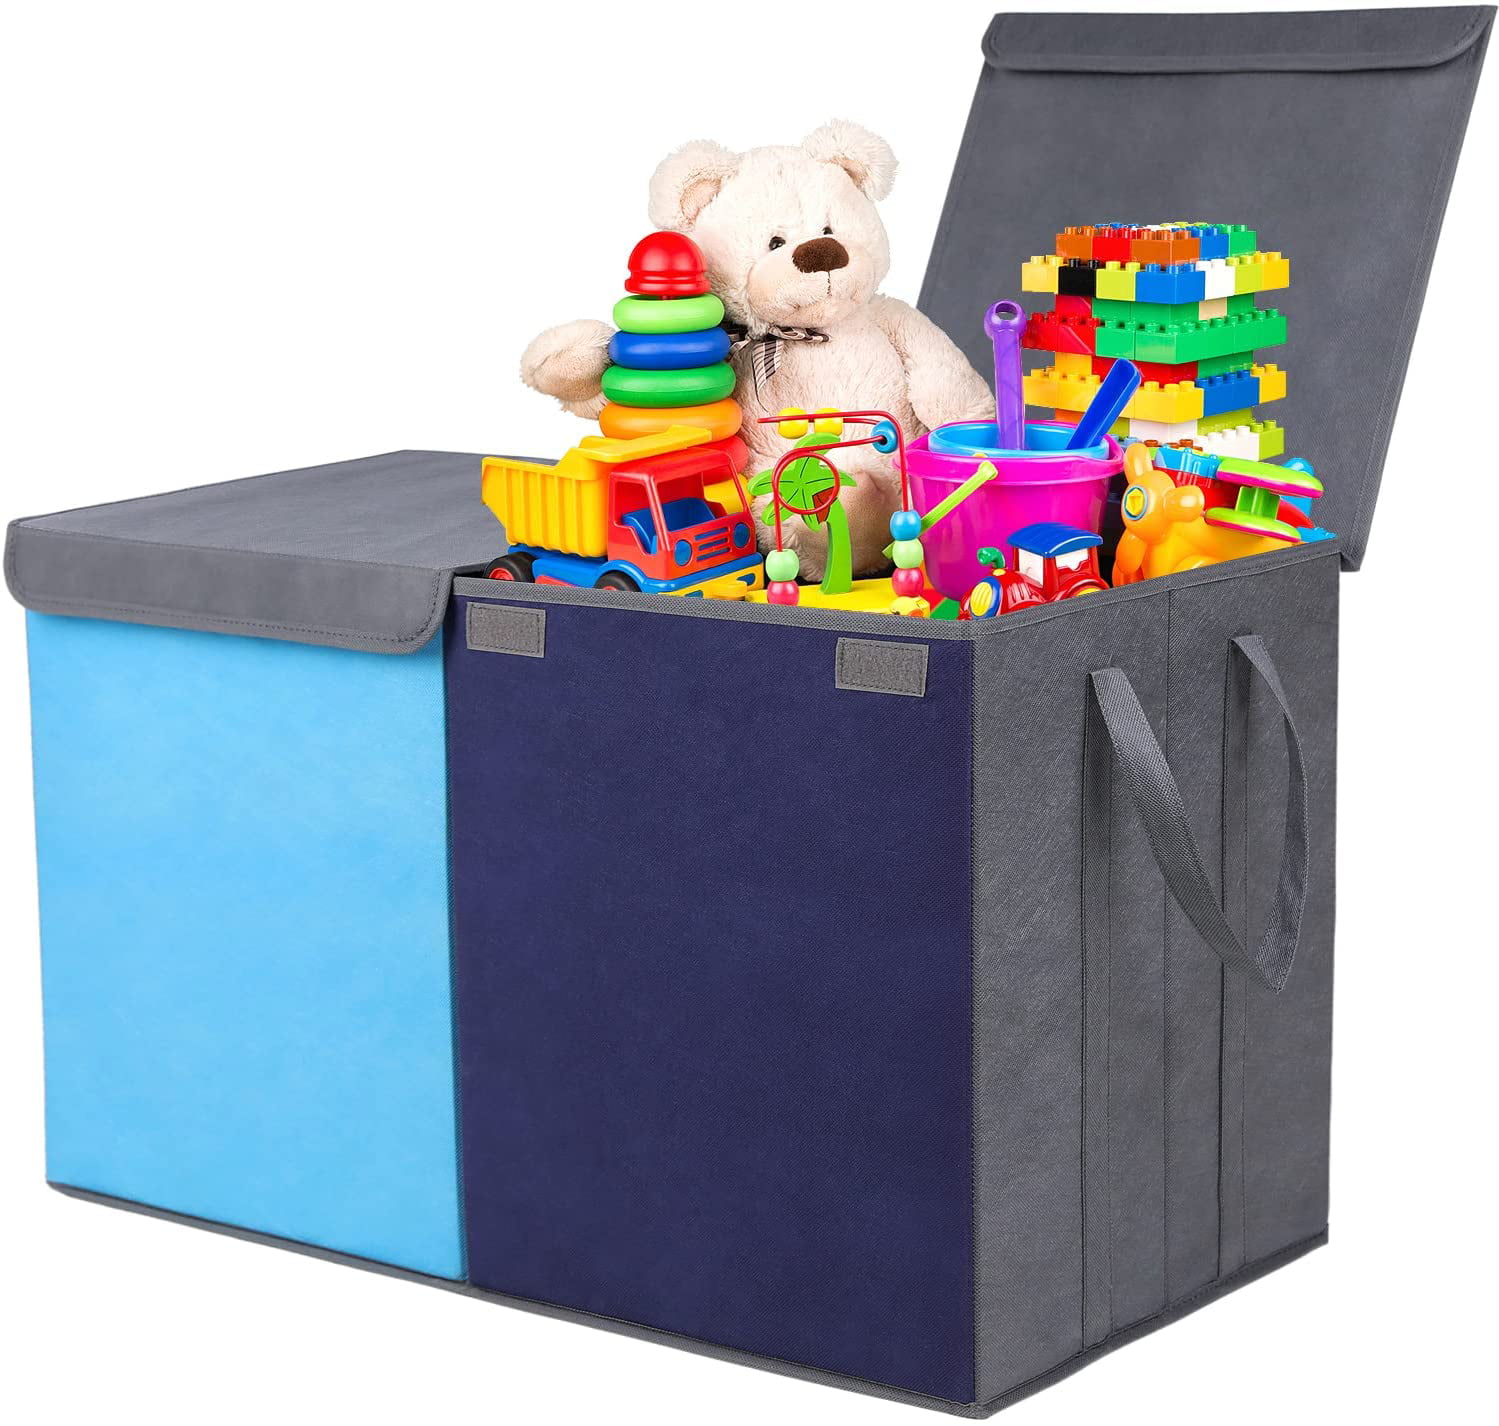 Easily Categorized Double Color Double Space Large Toy Storage Bins with Lids Collapsible Stackable Toy Box/Chest/Organizer/Basket with Handles for Boys Girls Baby Storage Containers for Kids Clothes Book Lego V-Blue